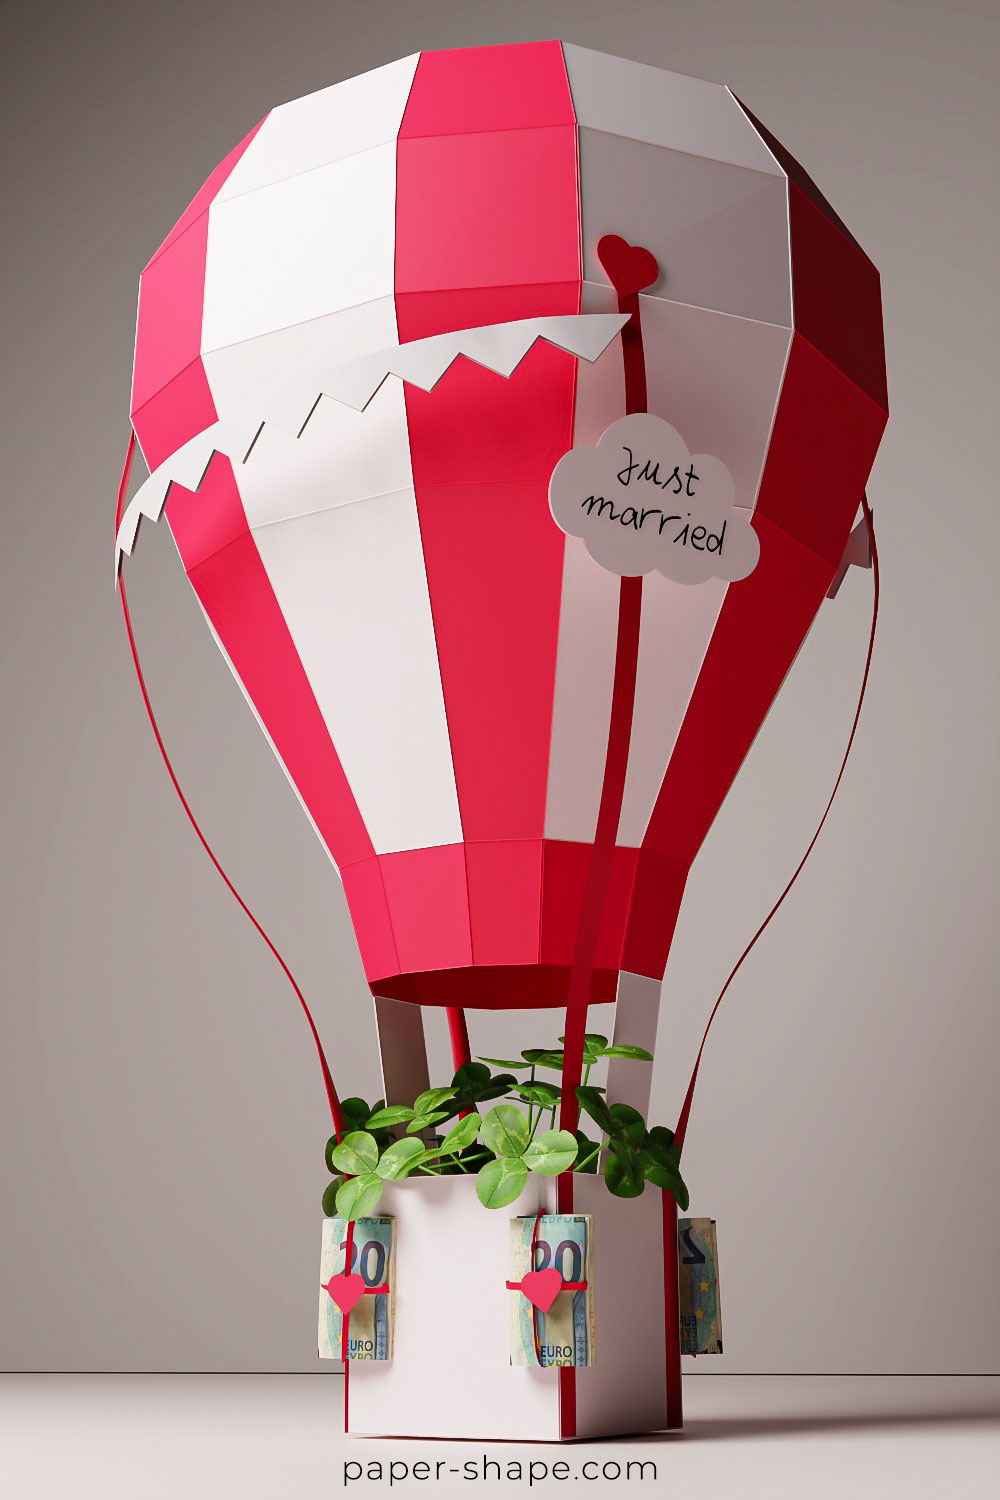 Hot air balloon in red and pearl white with banknotes as money bags 